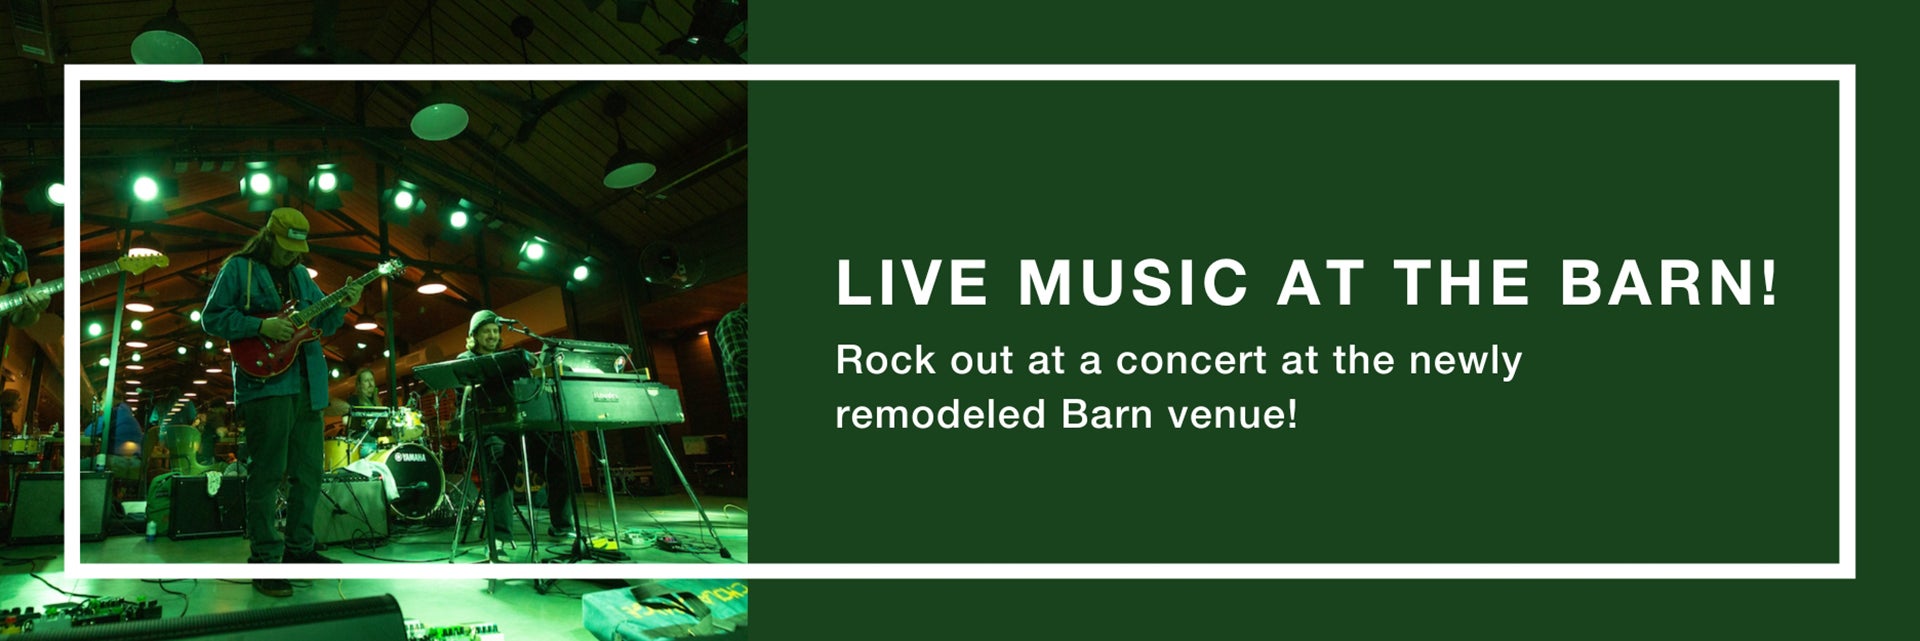 Live Music at The Barn